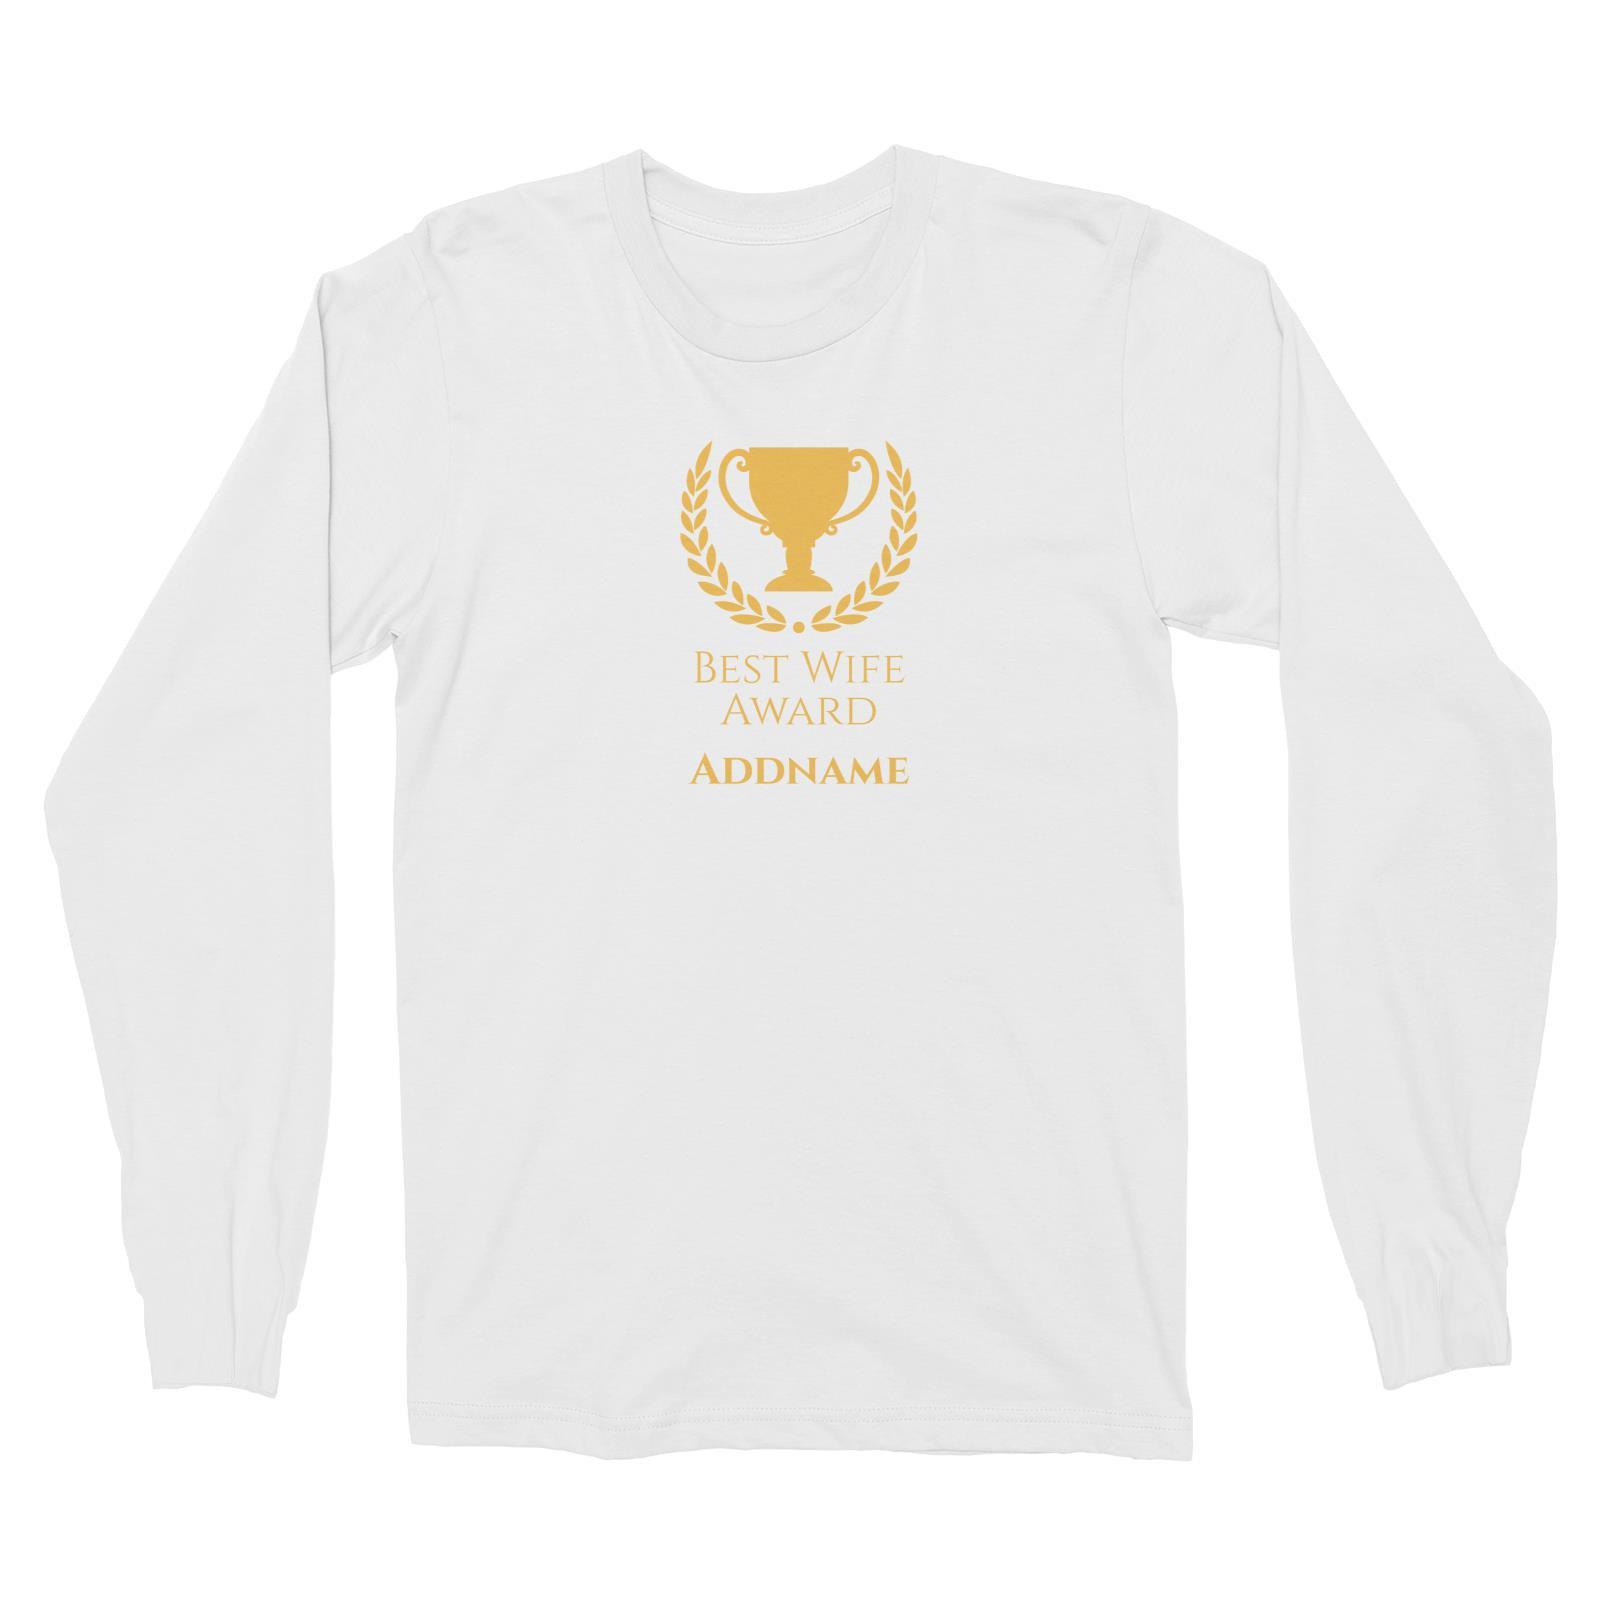 Husband and Wife Trophy Best Wife Award Addname Long Sleeve Unisex T-Shirt